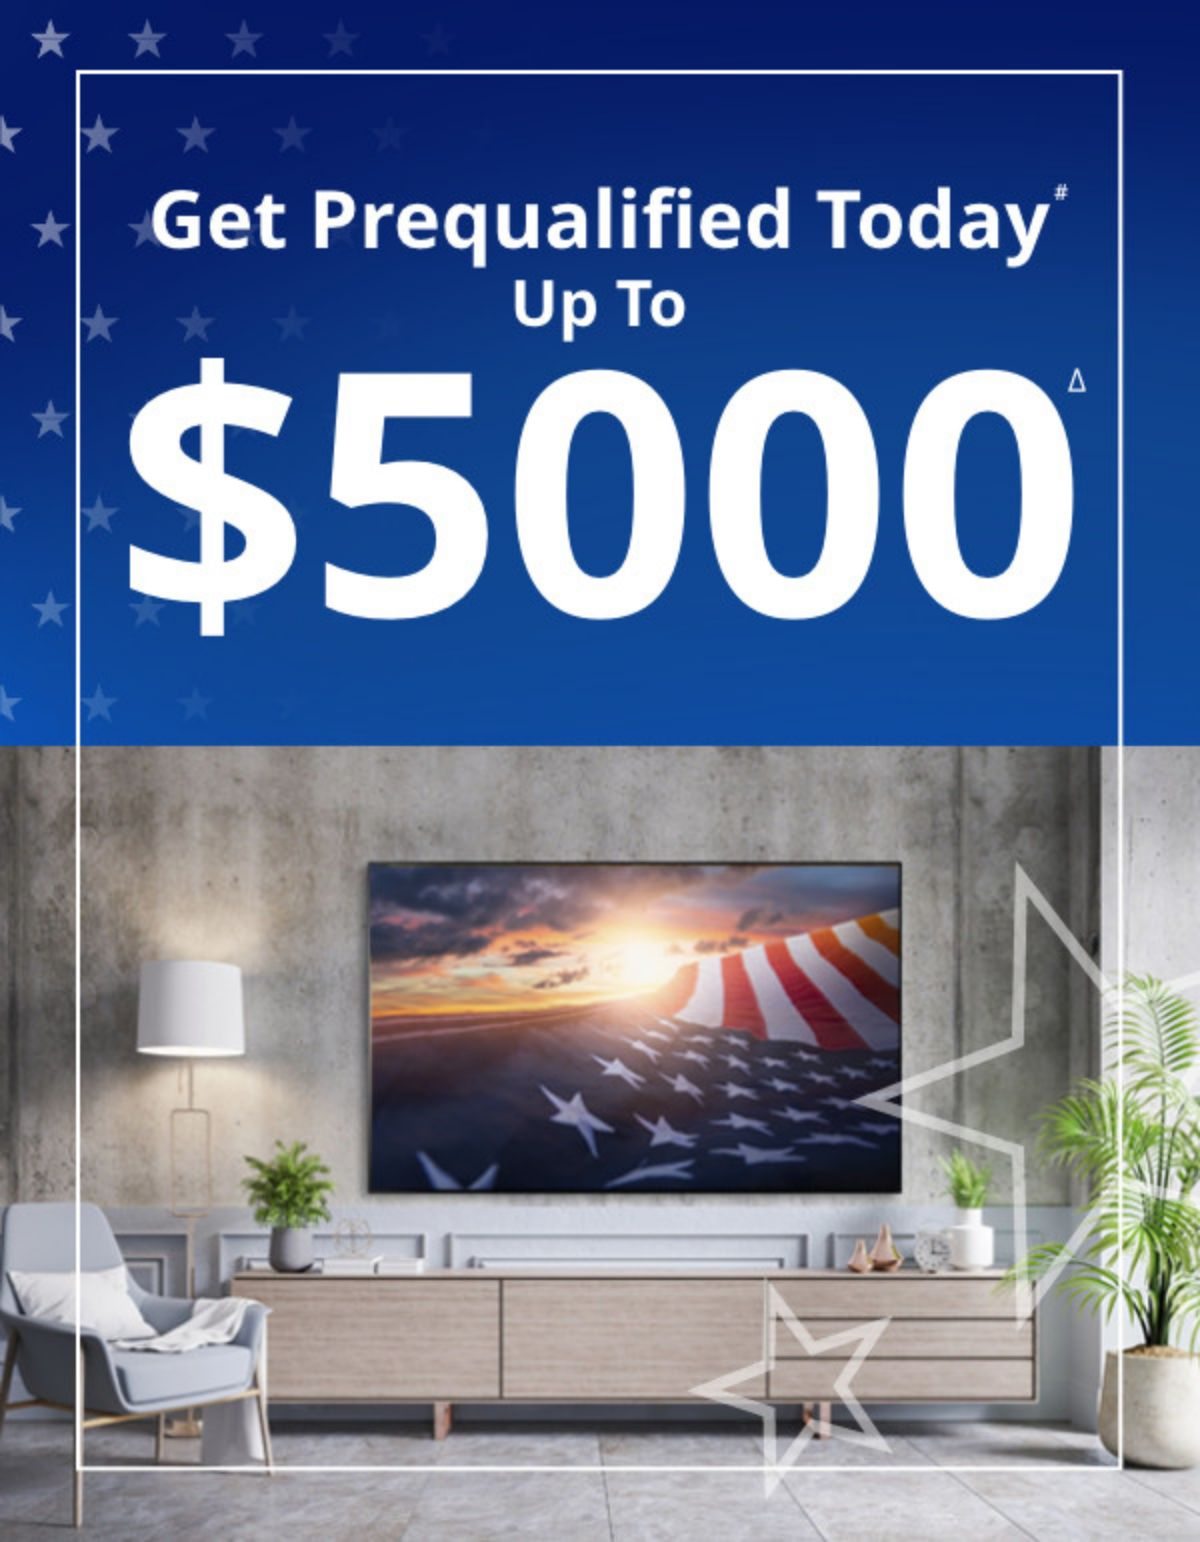 Get prequalified for up to 5K today